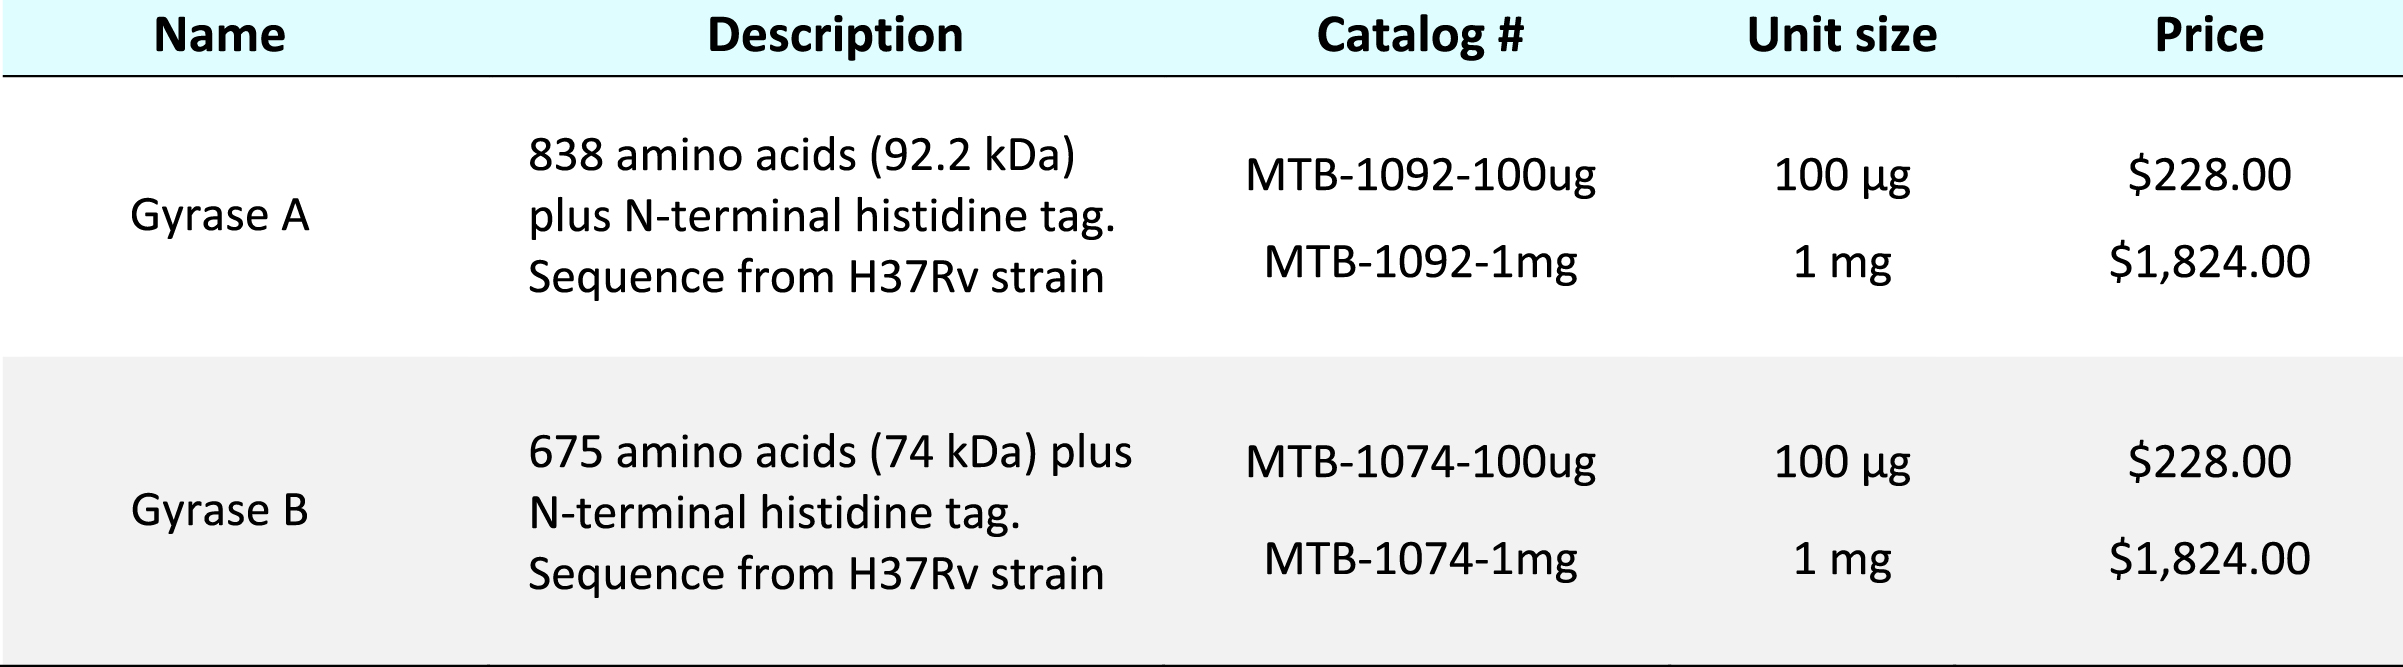 Cost for 100 µg and 1 mg of Gyrase A and Gyrase B proteins from M. tuberculosis at Mission Trail BioLabs.